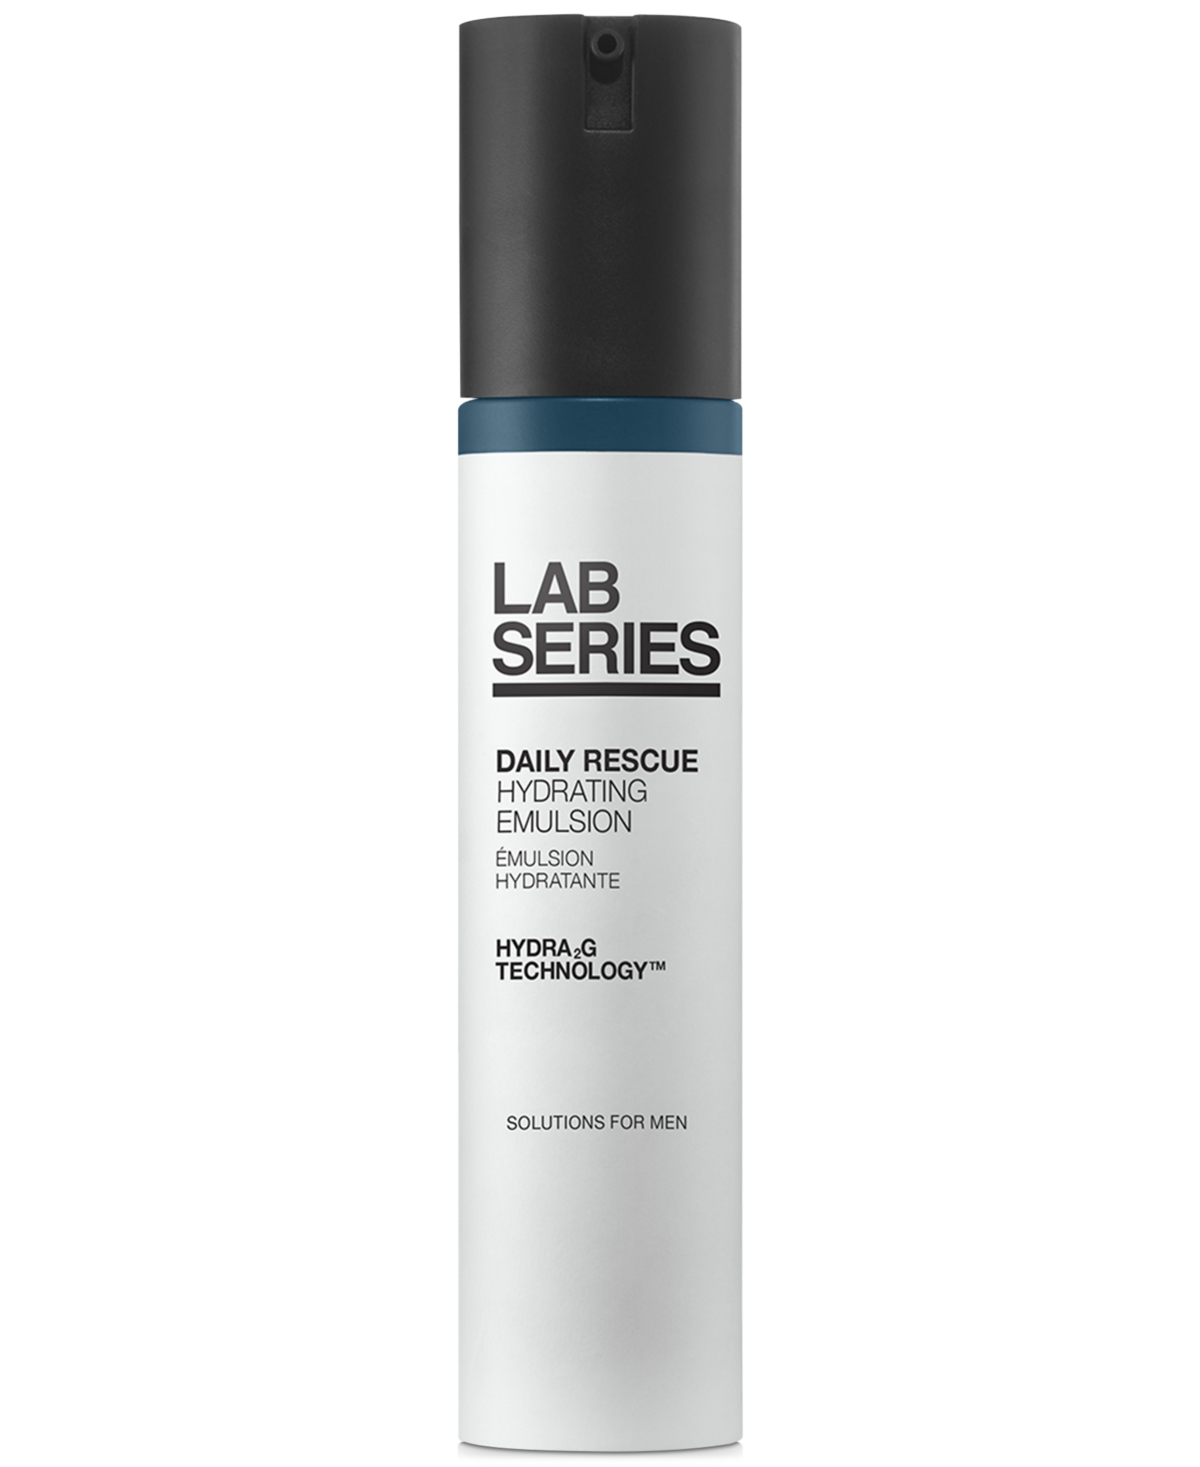 Lab Series Daily Rescue Hydrating Emulsion, 1.7-oz.